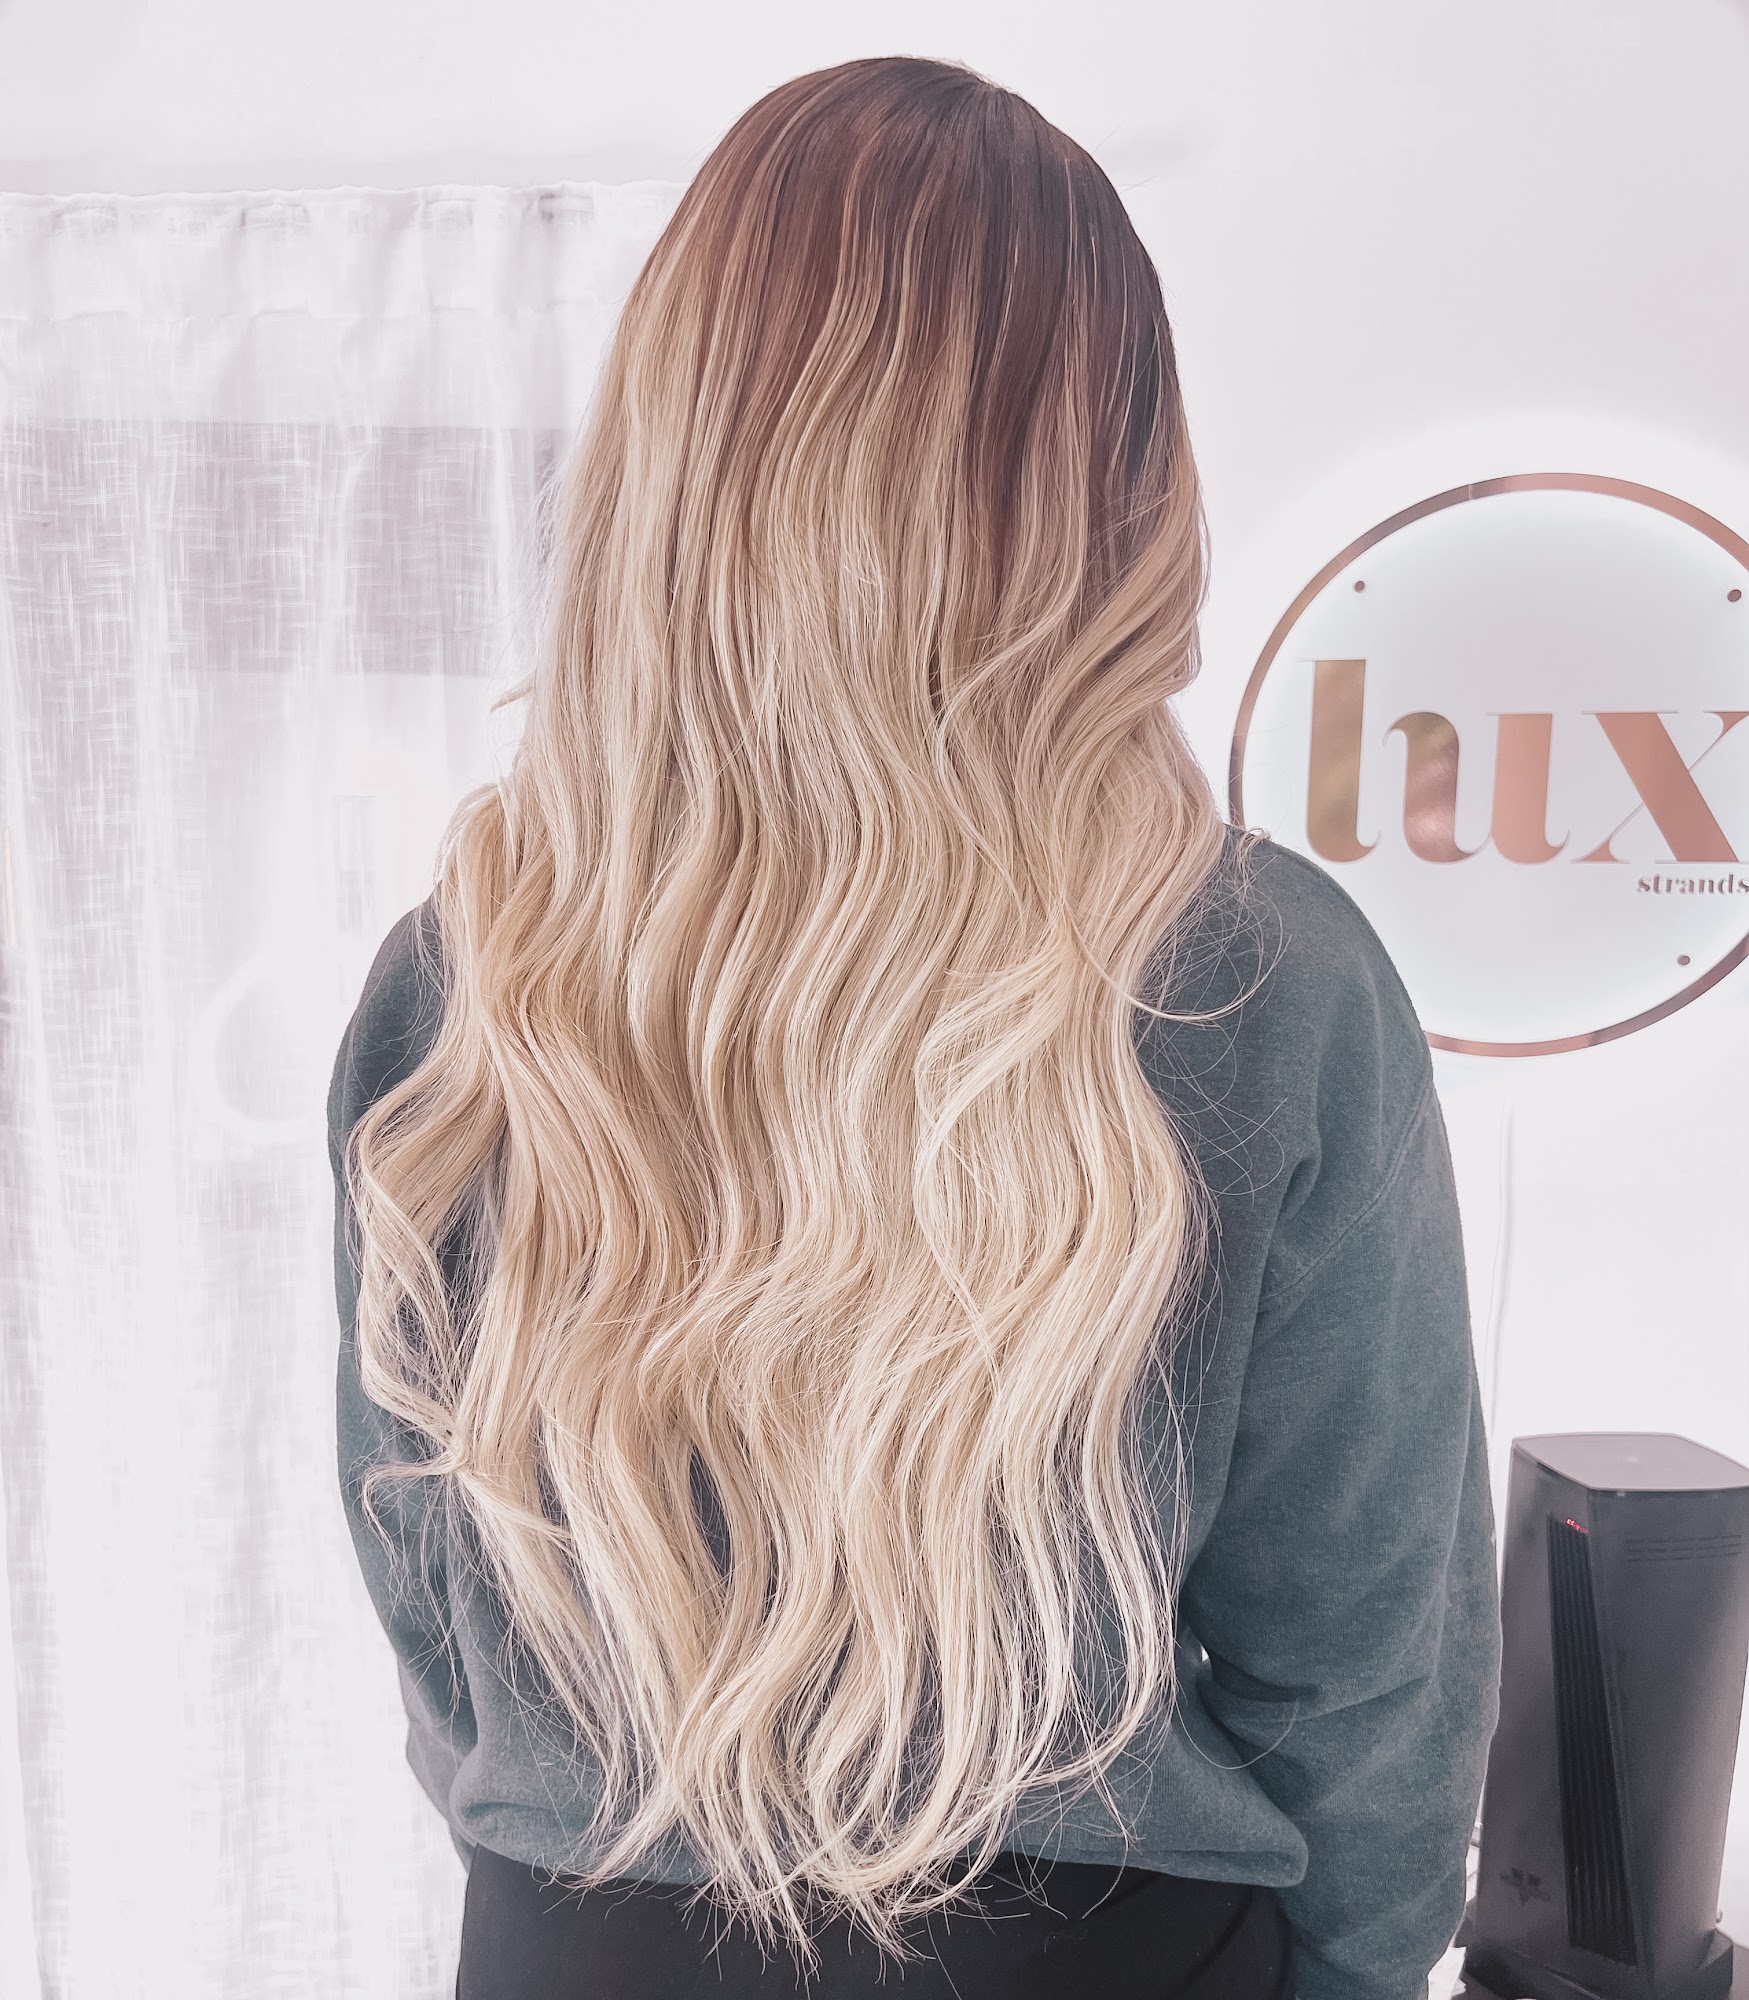 Lux Strands